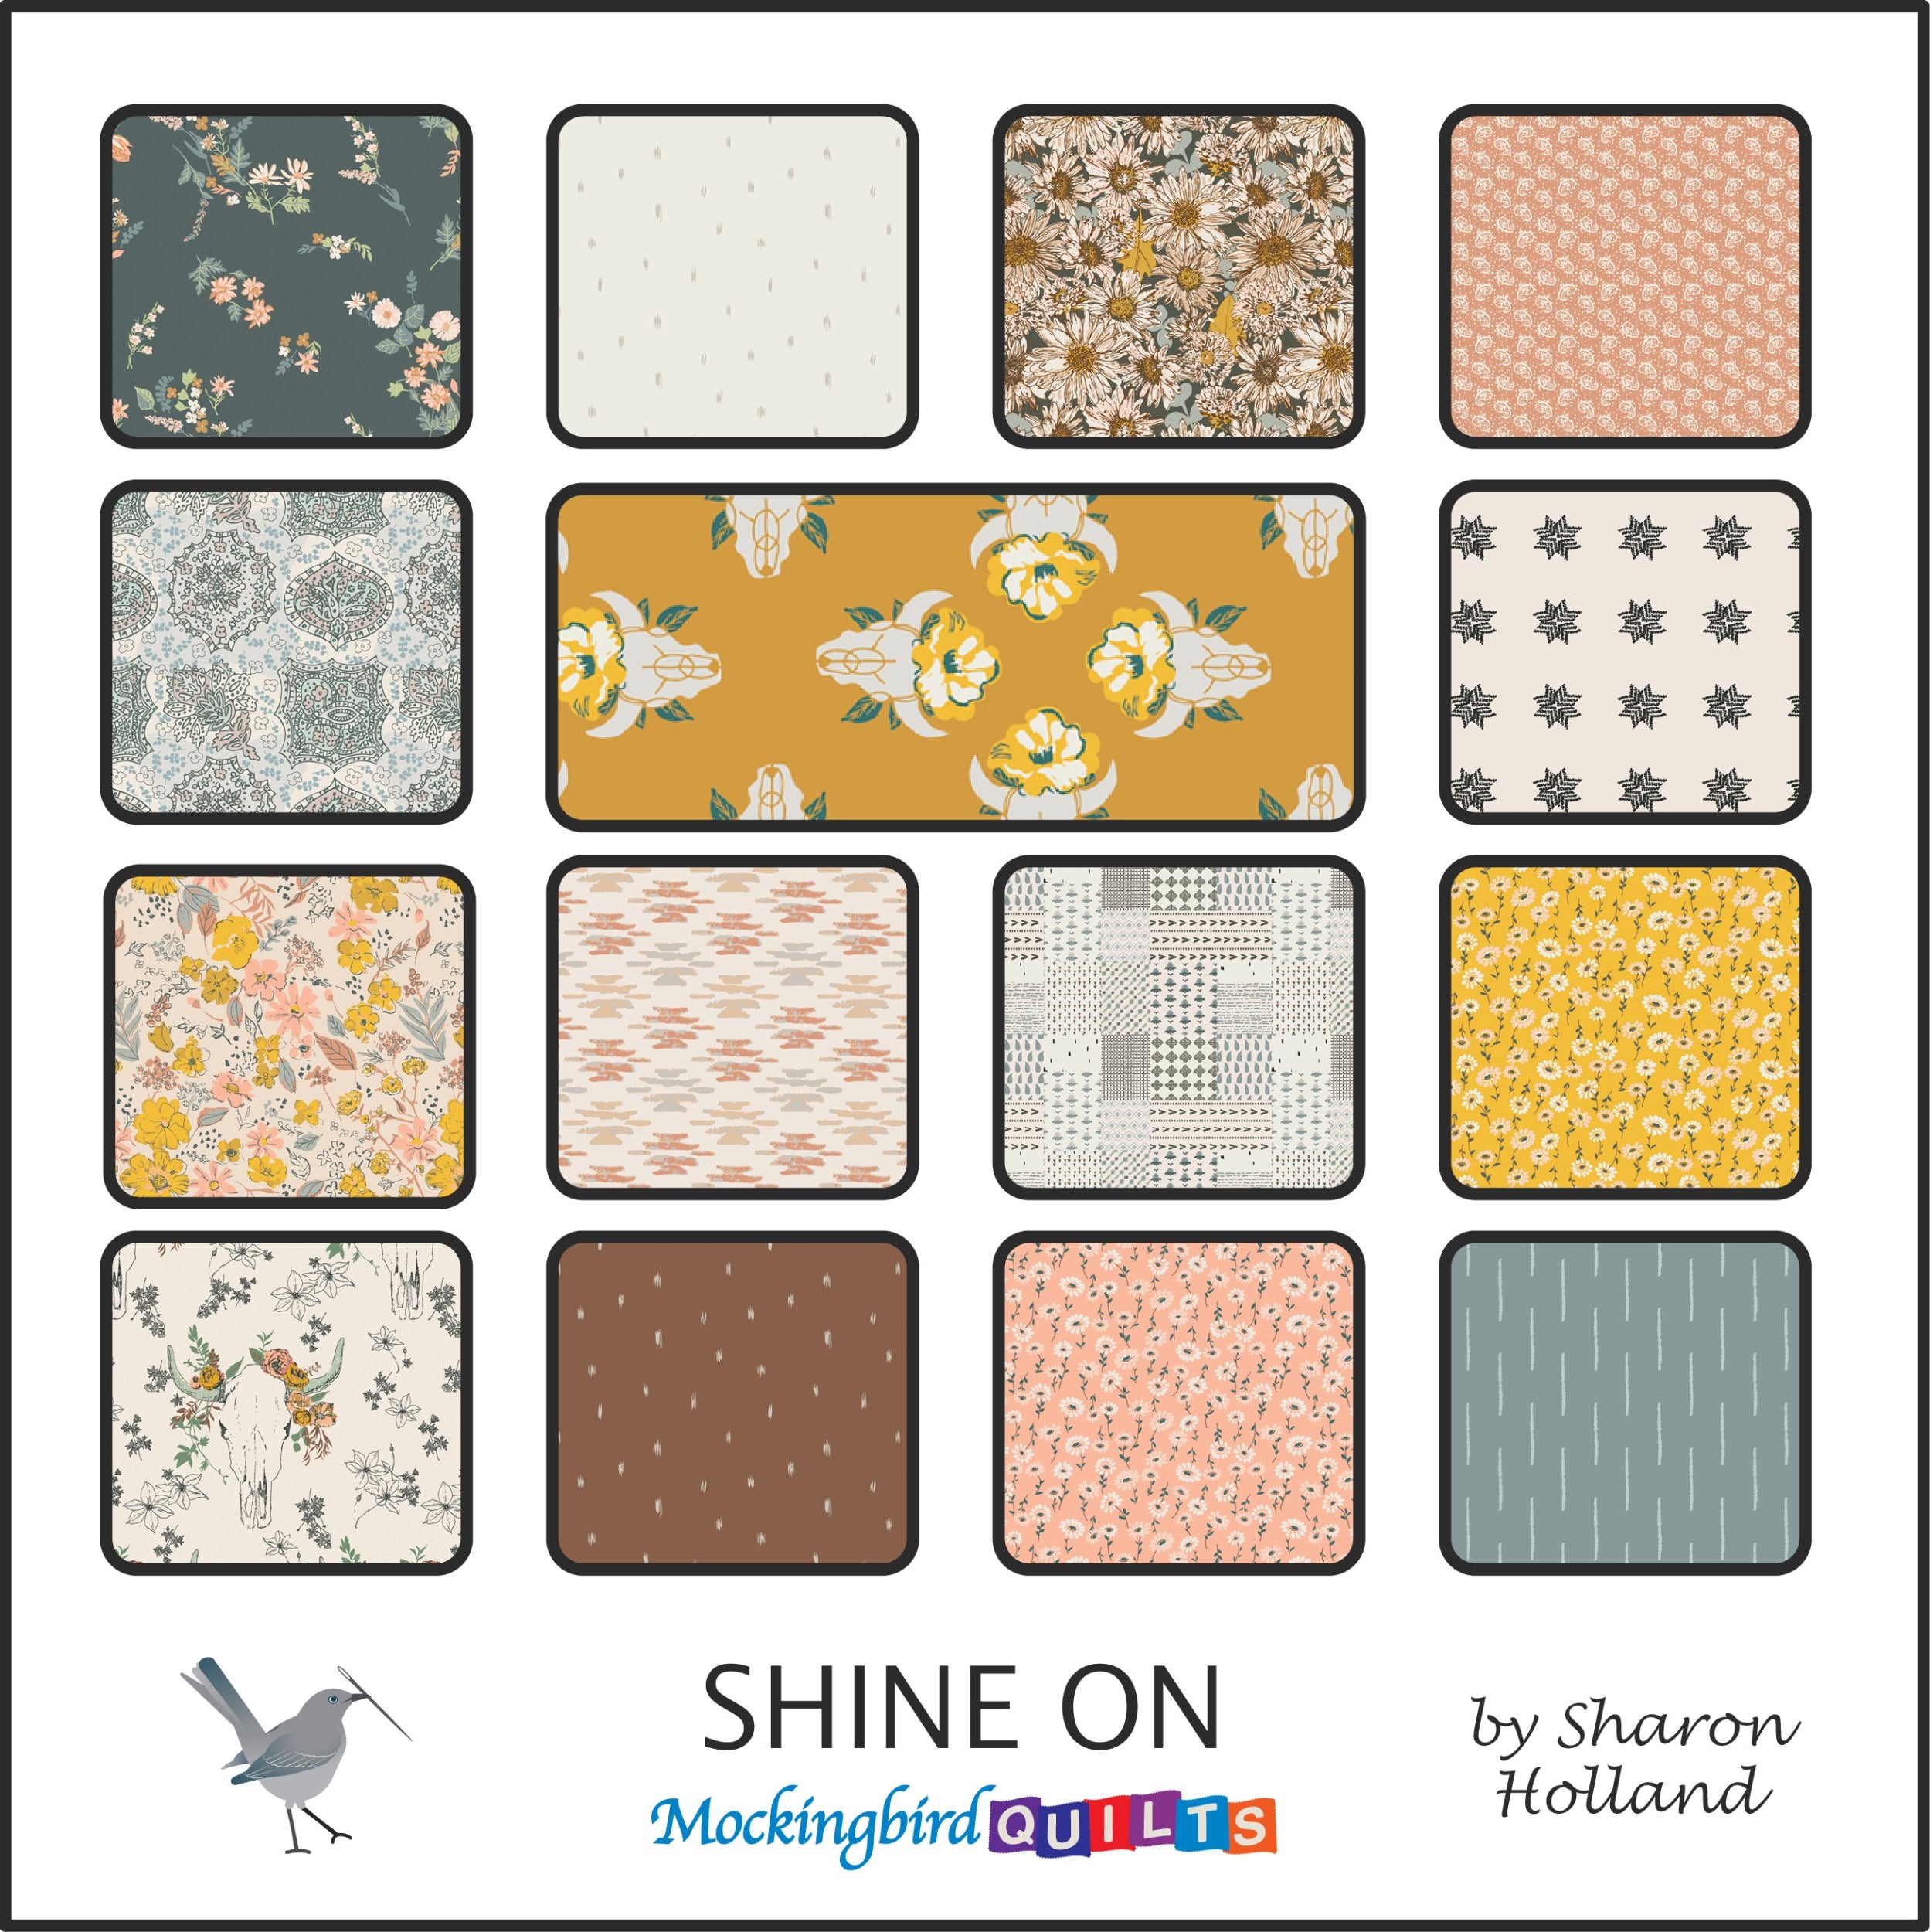 This image shows sixteen fabric swatches in the collection “Shine On” by Sharon Holland. This line was inspired by the transition from winter to spring, with colors like golden yellow, steel blue, white, and sepia tones. 